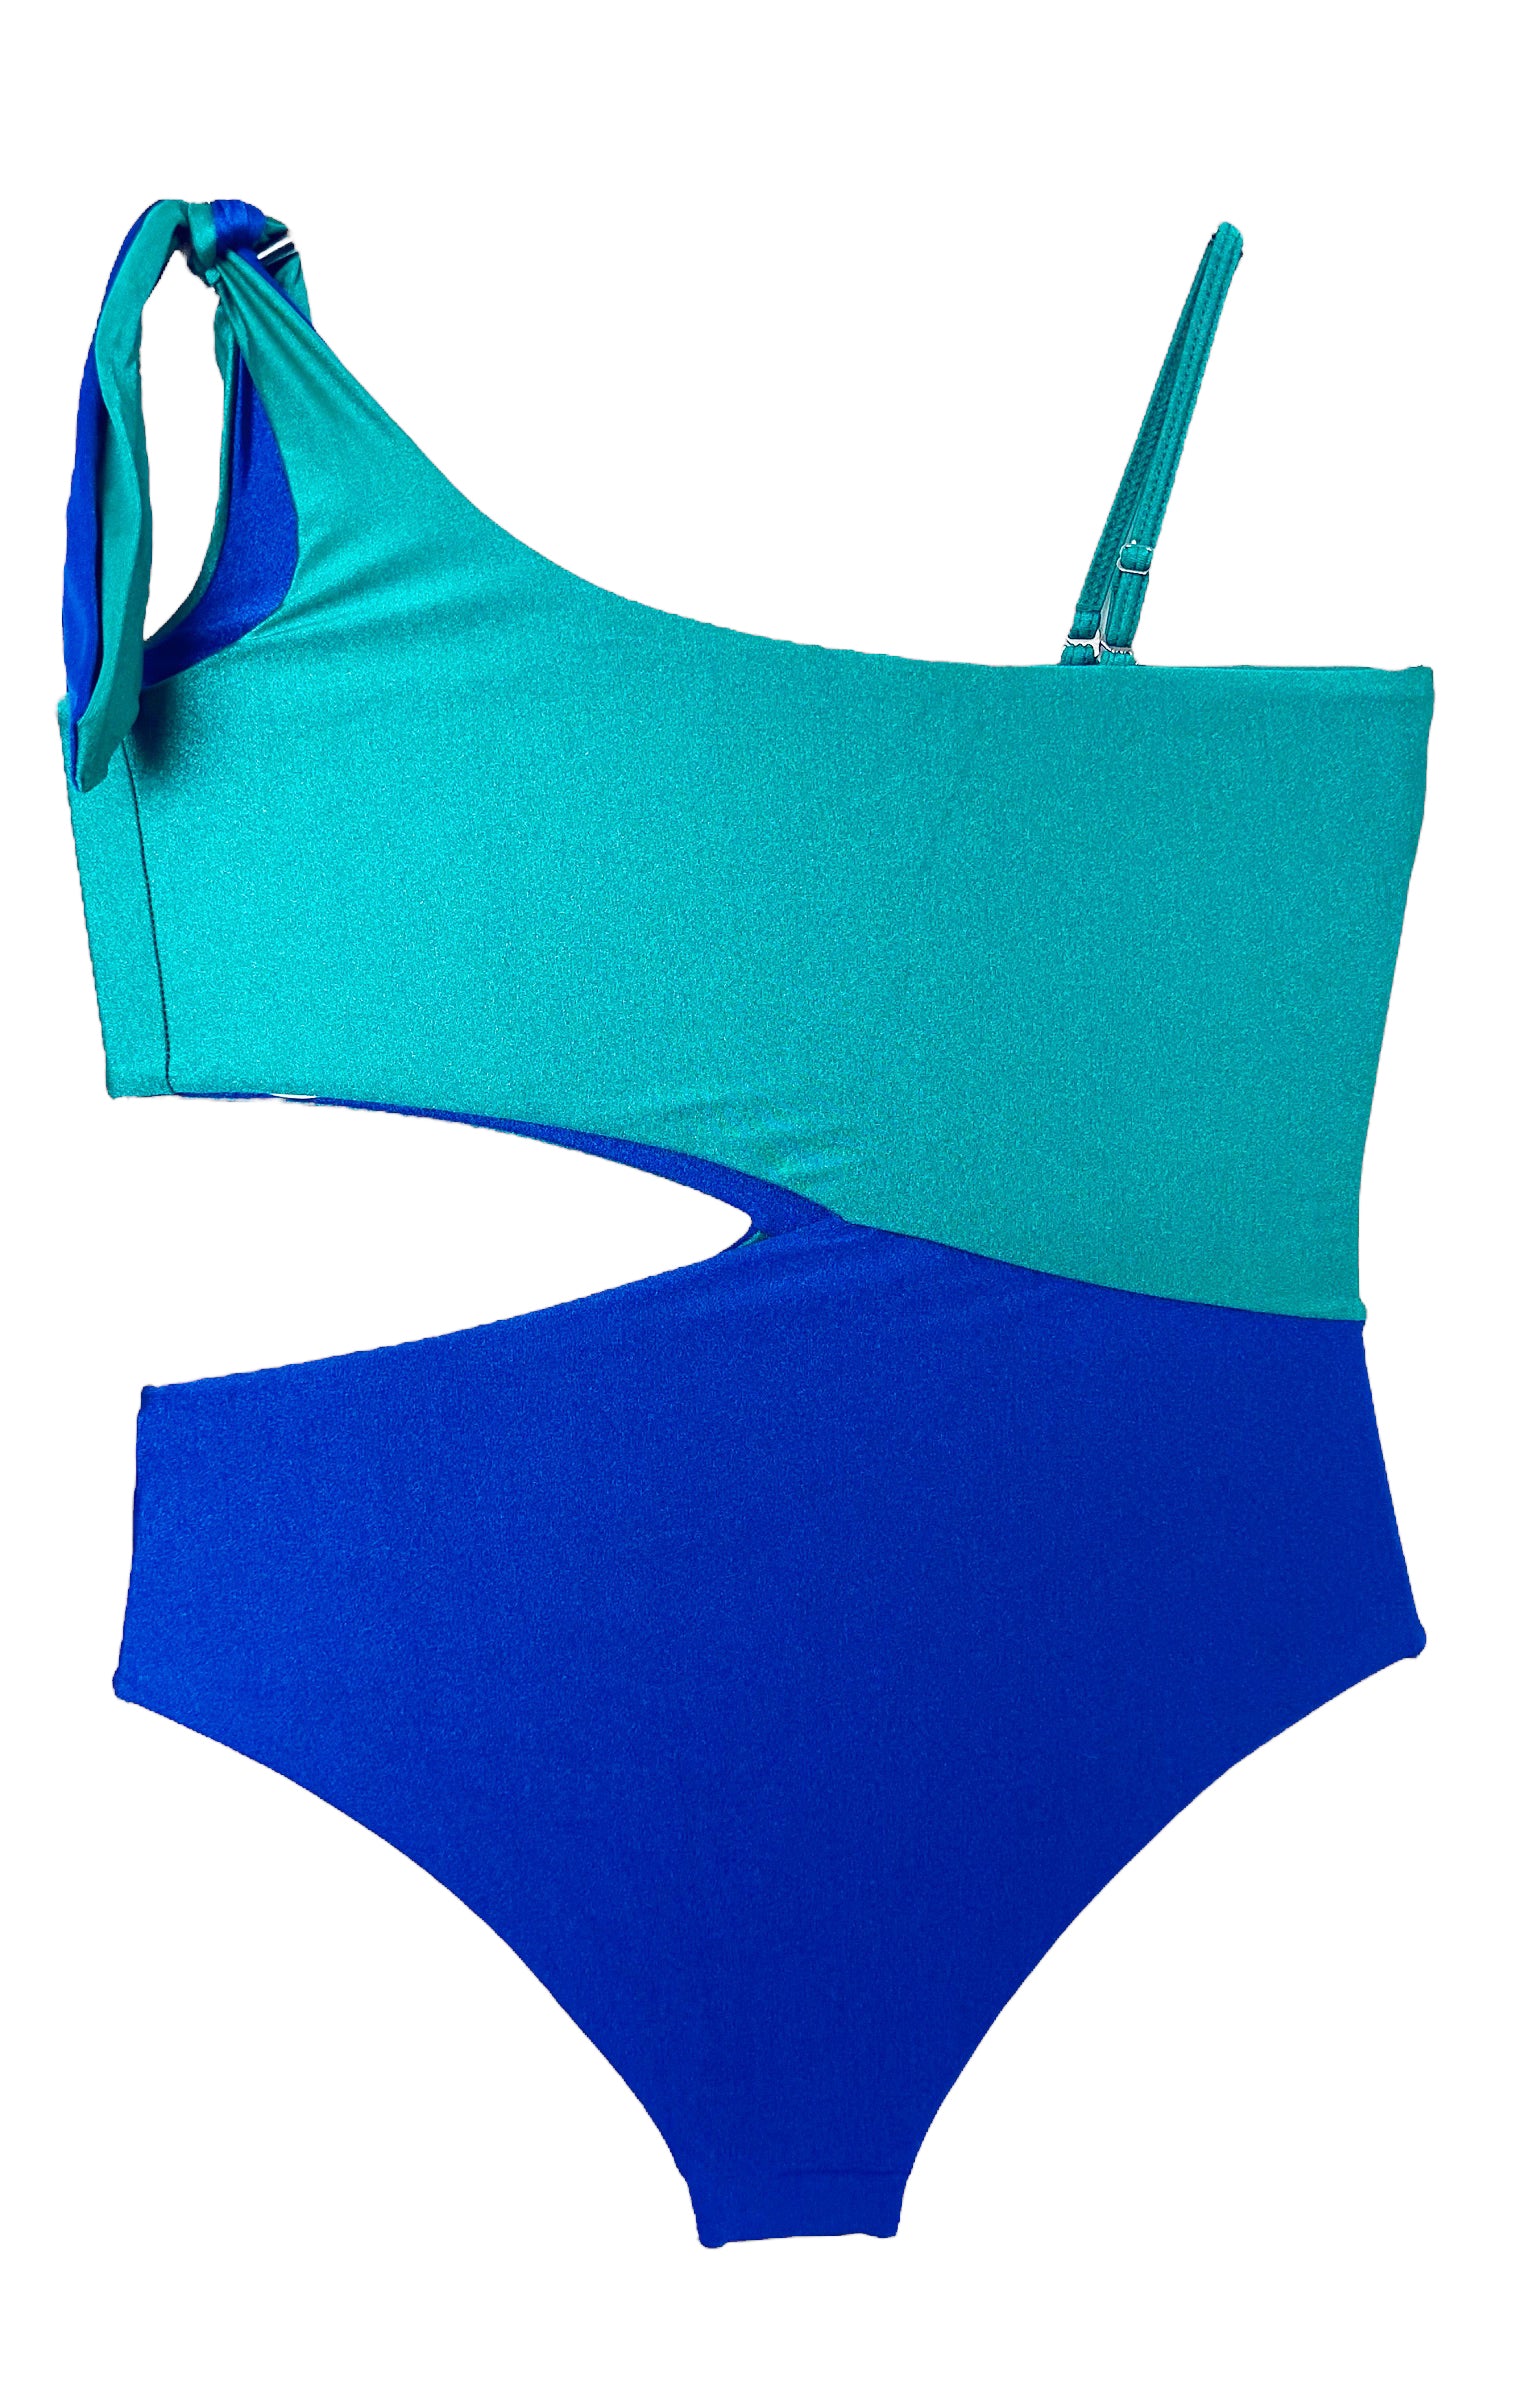 ASYMMETRIC BLUE AND EMERALD GREEN ONE-PIECE